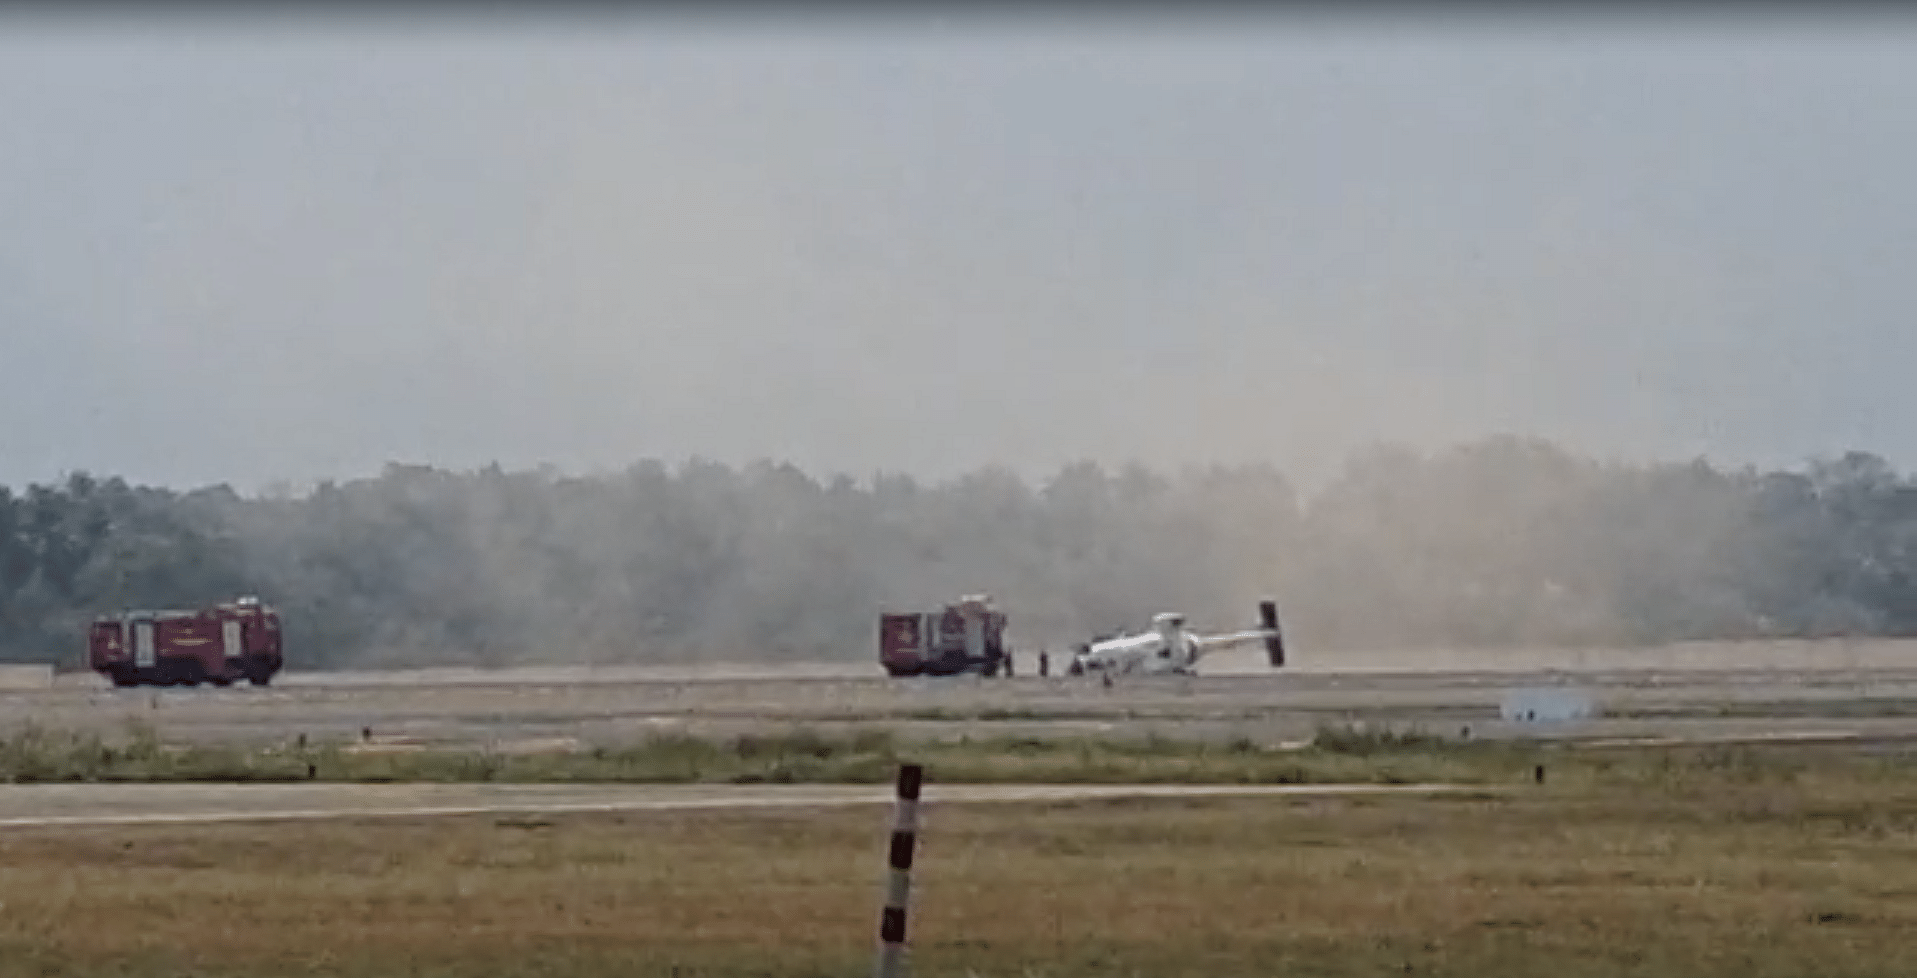 Screengrab from a video shows the crashed chopper on the runway in Kochi. Credit: Special Arrangement